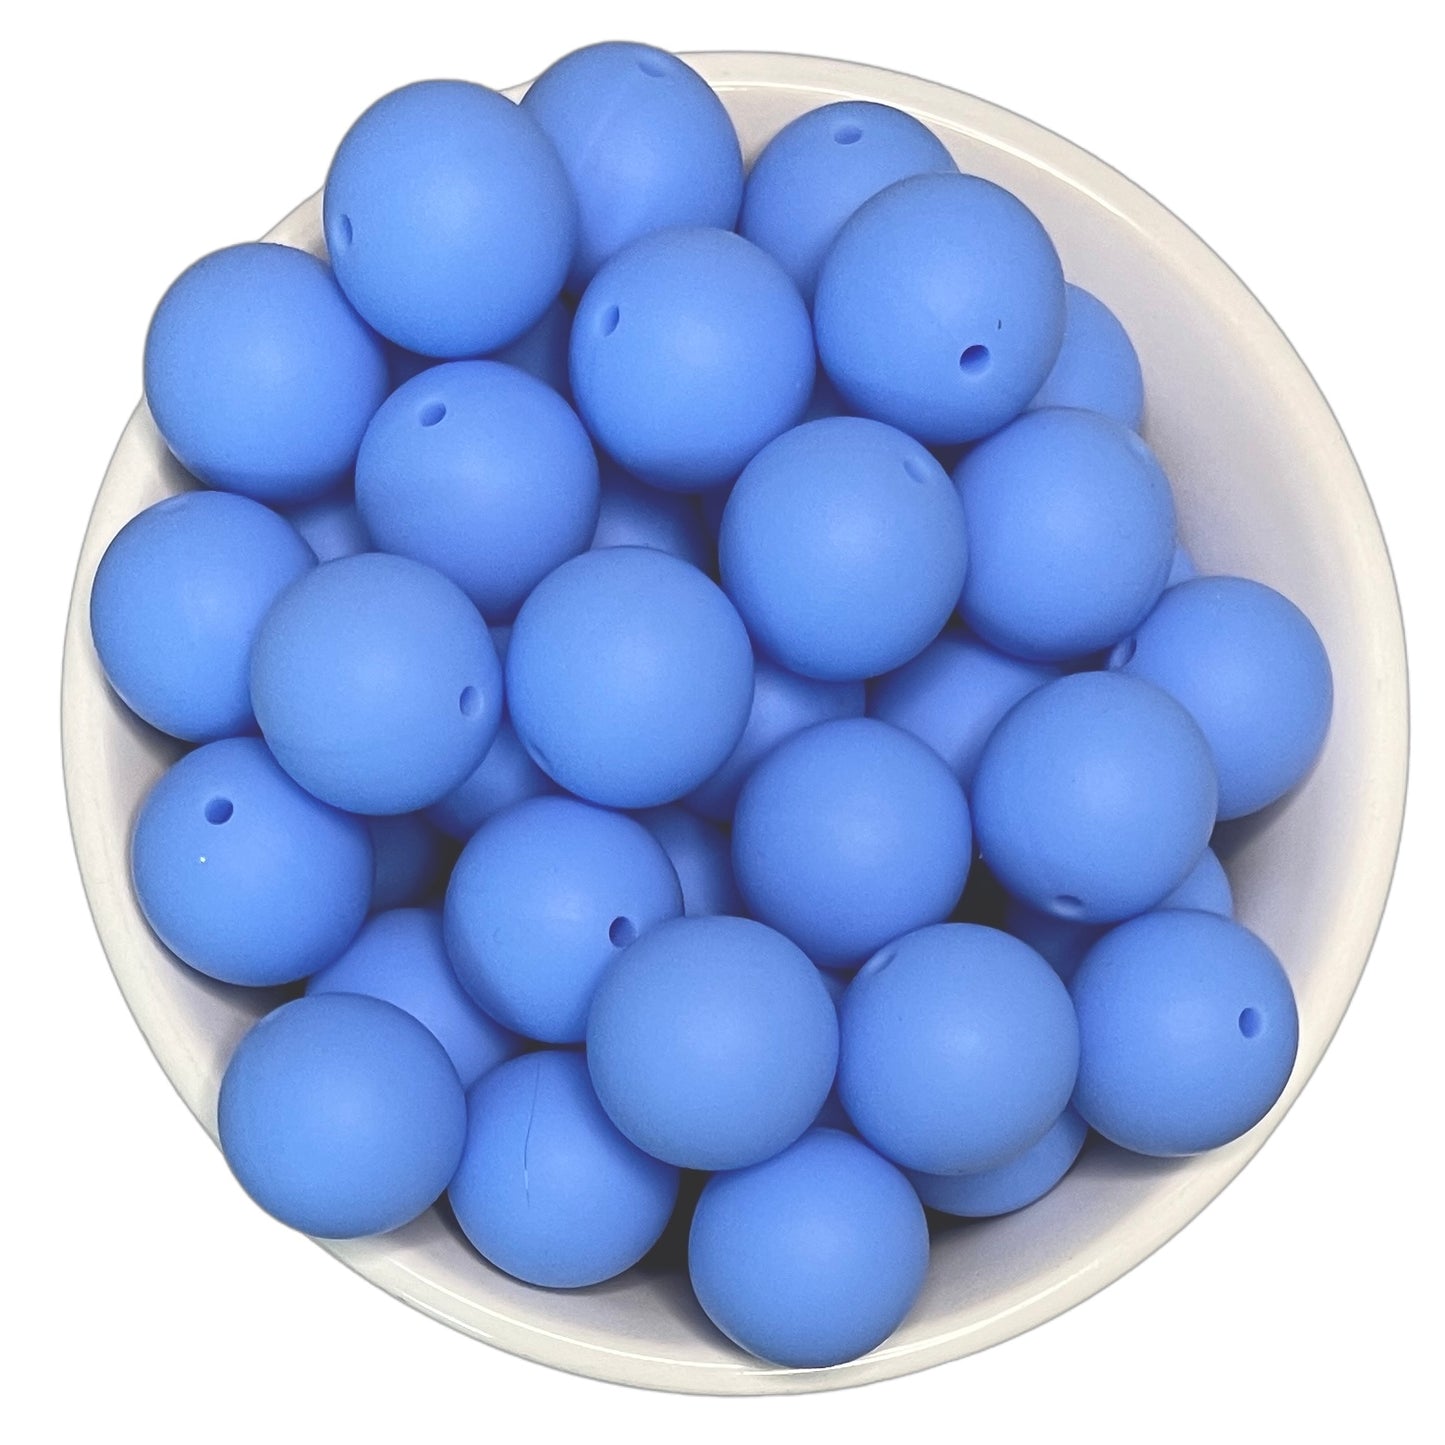 Serenity 19mm Silicone Beads - 5 pk.